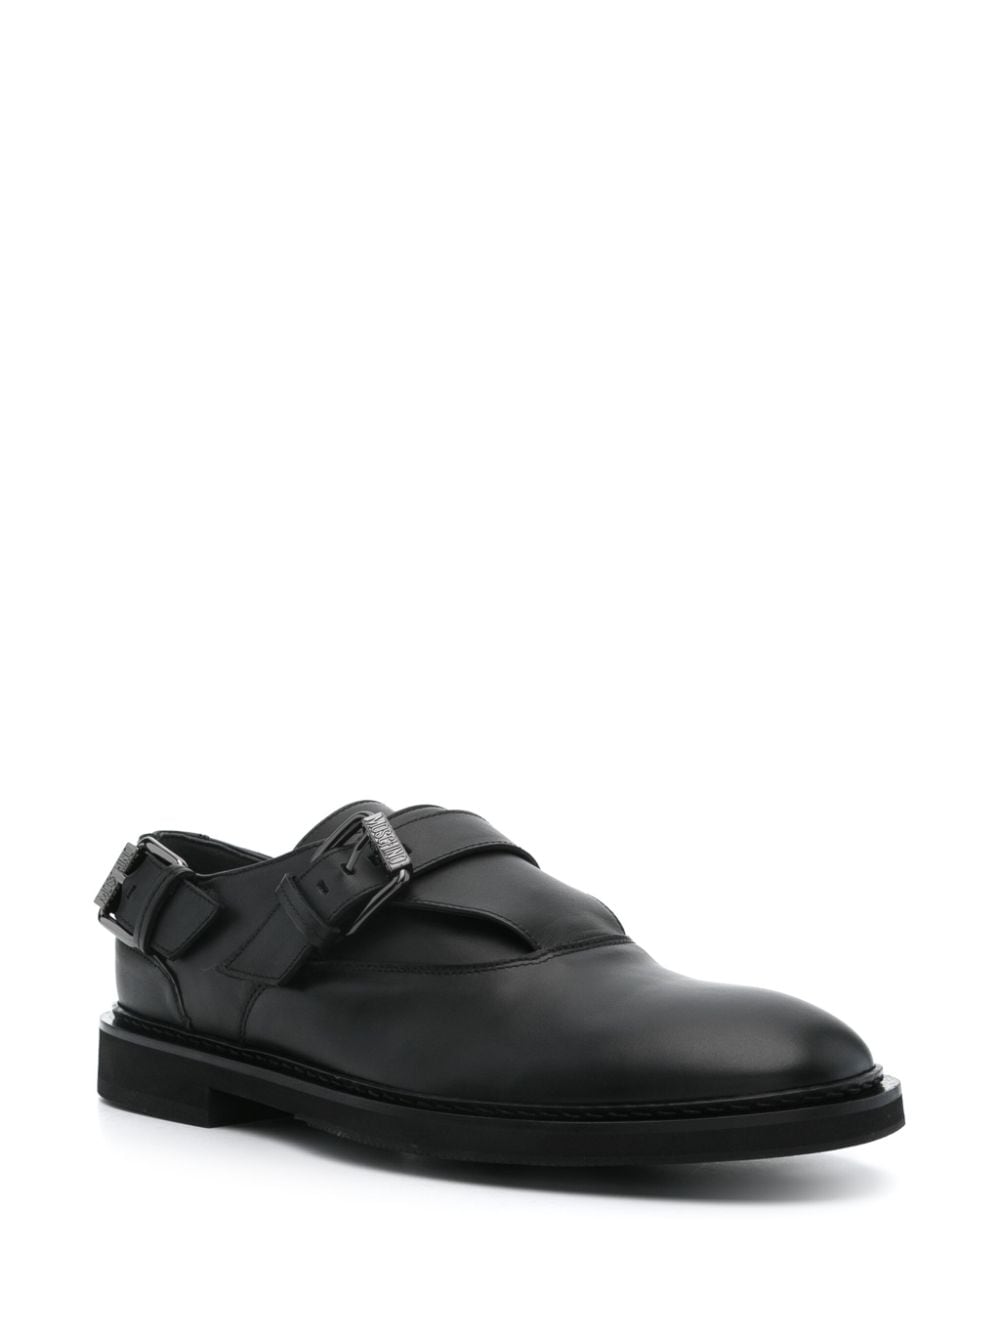 Moschino Micro buckled leather monk shoes - Zwart